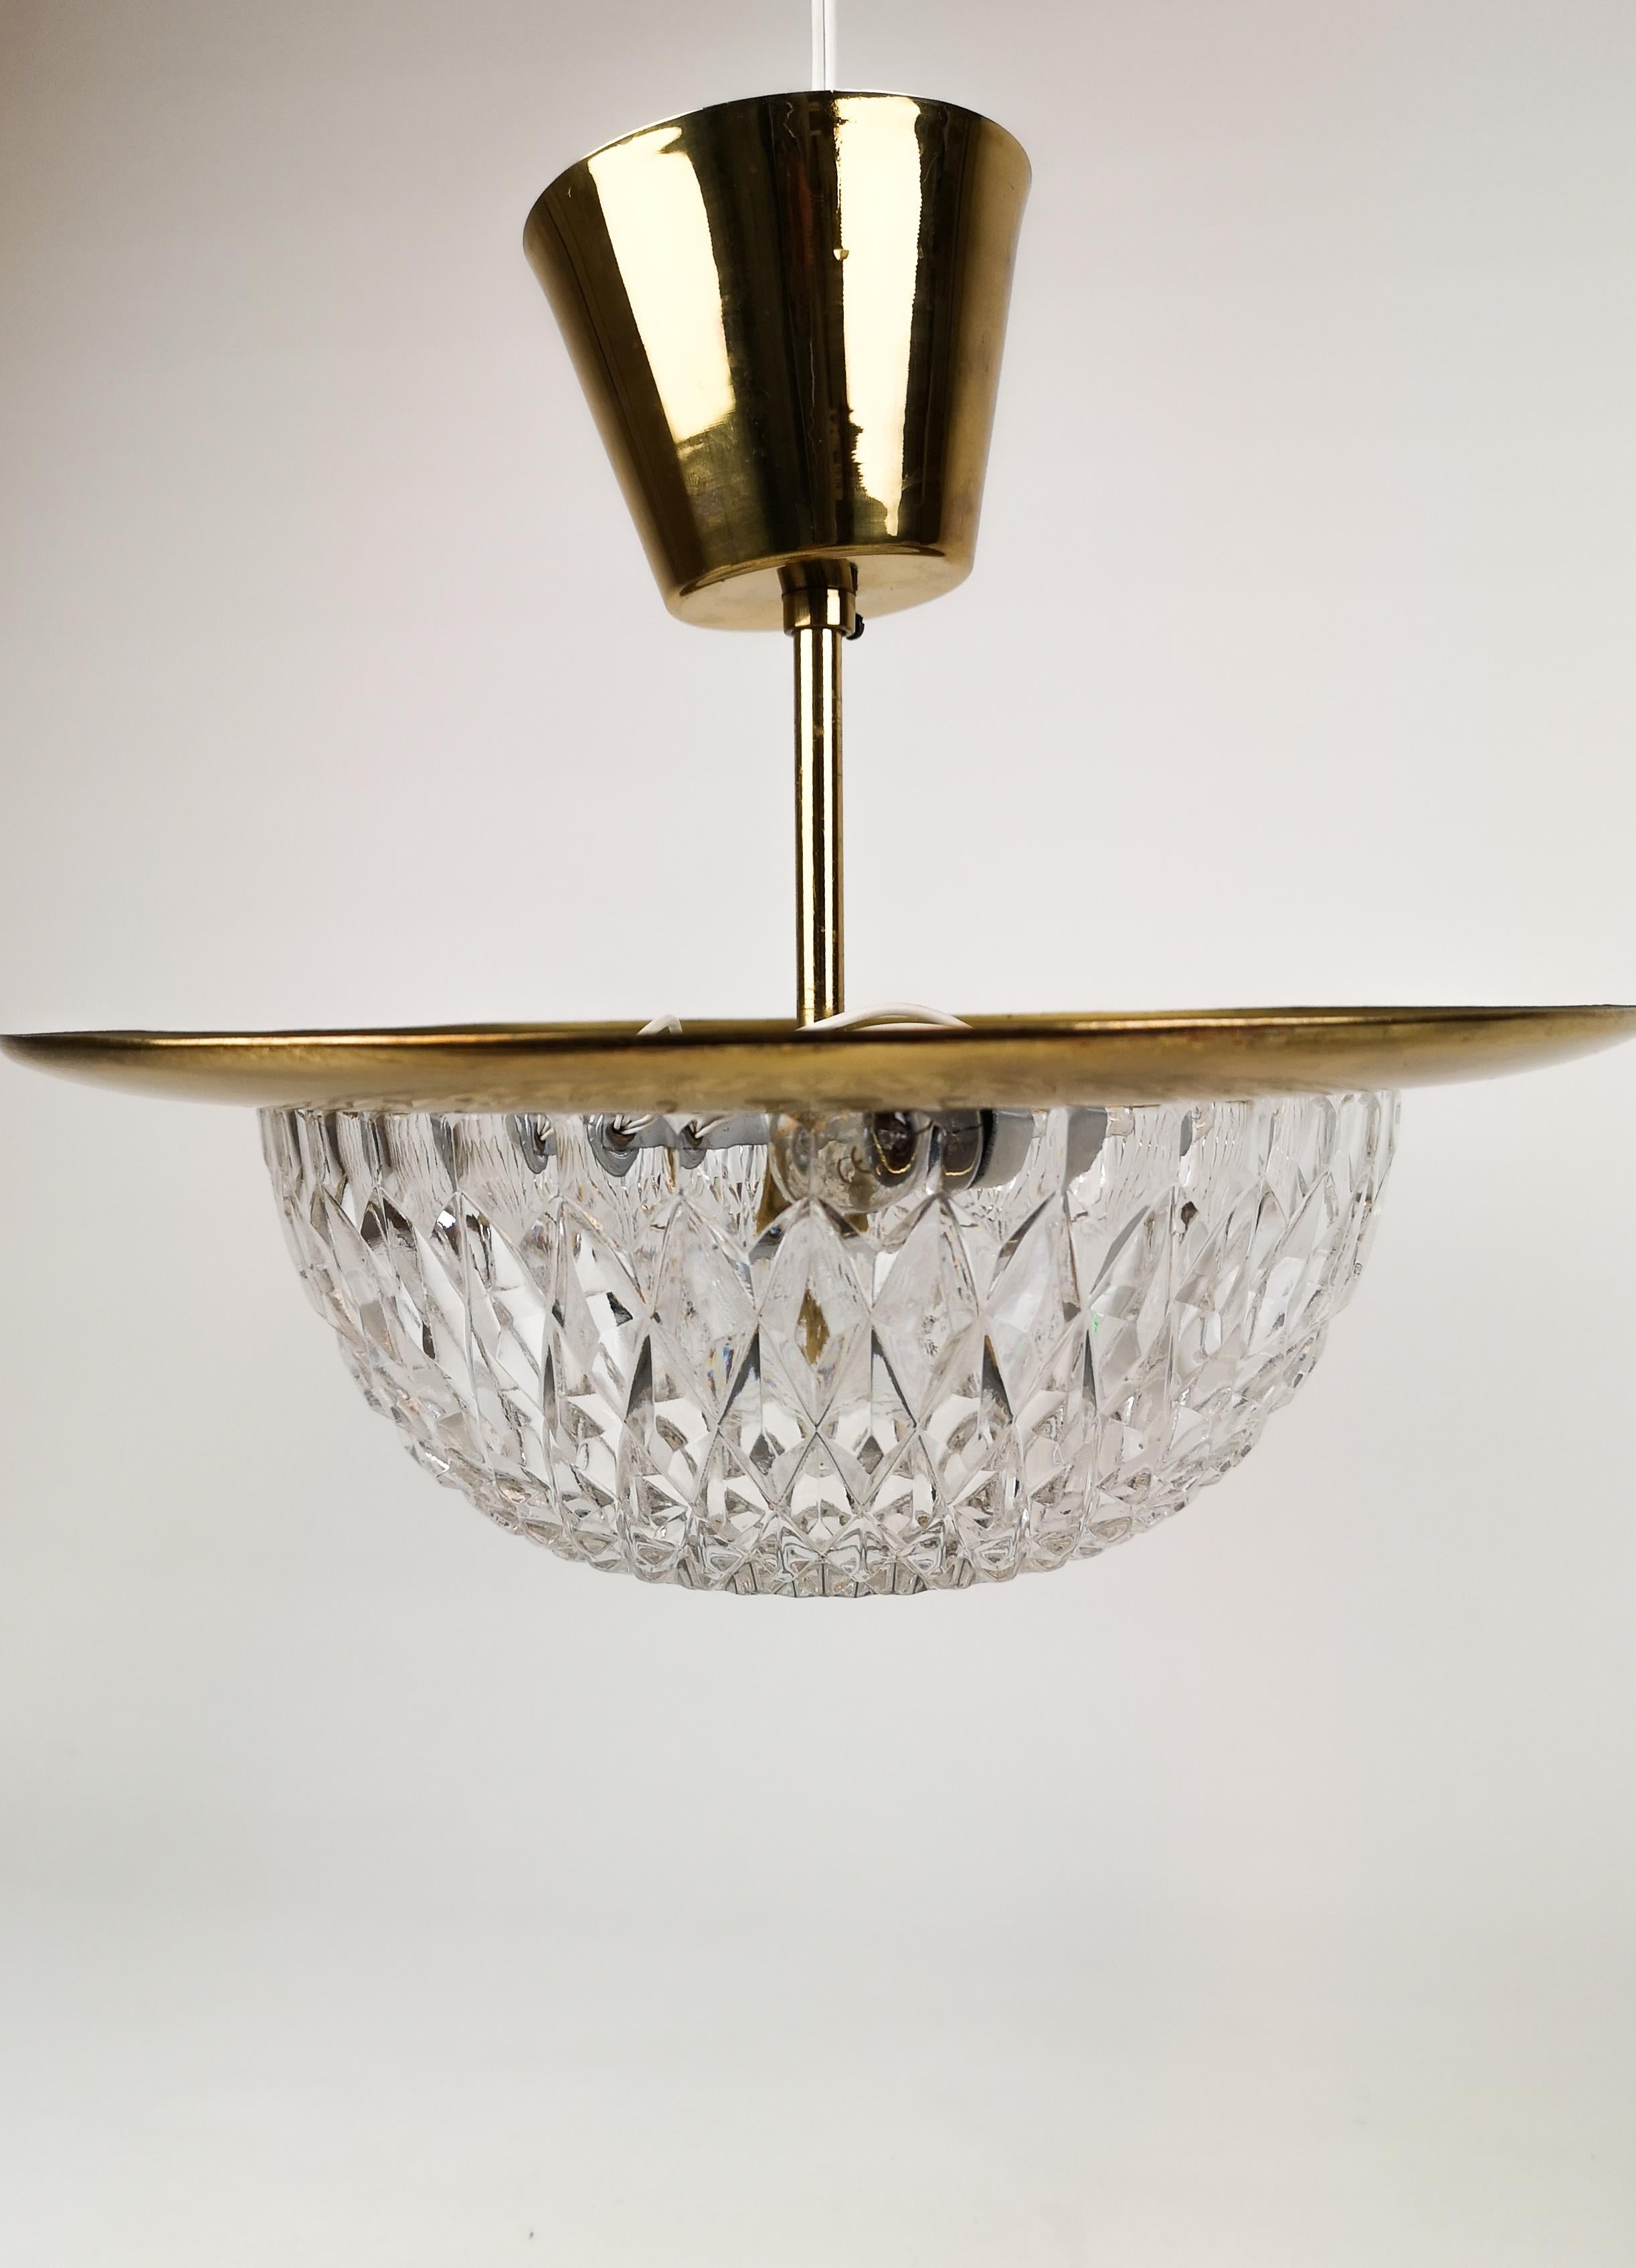 Scandinavian Modern 1960s, Brass and Crystal Celling Lamp by Tyringe for Orrefors, Sweden For Sale